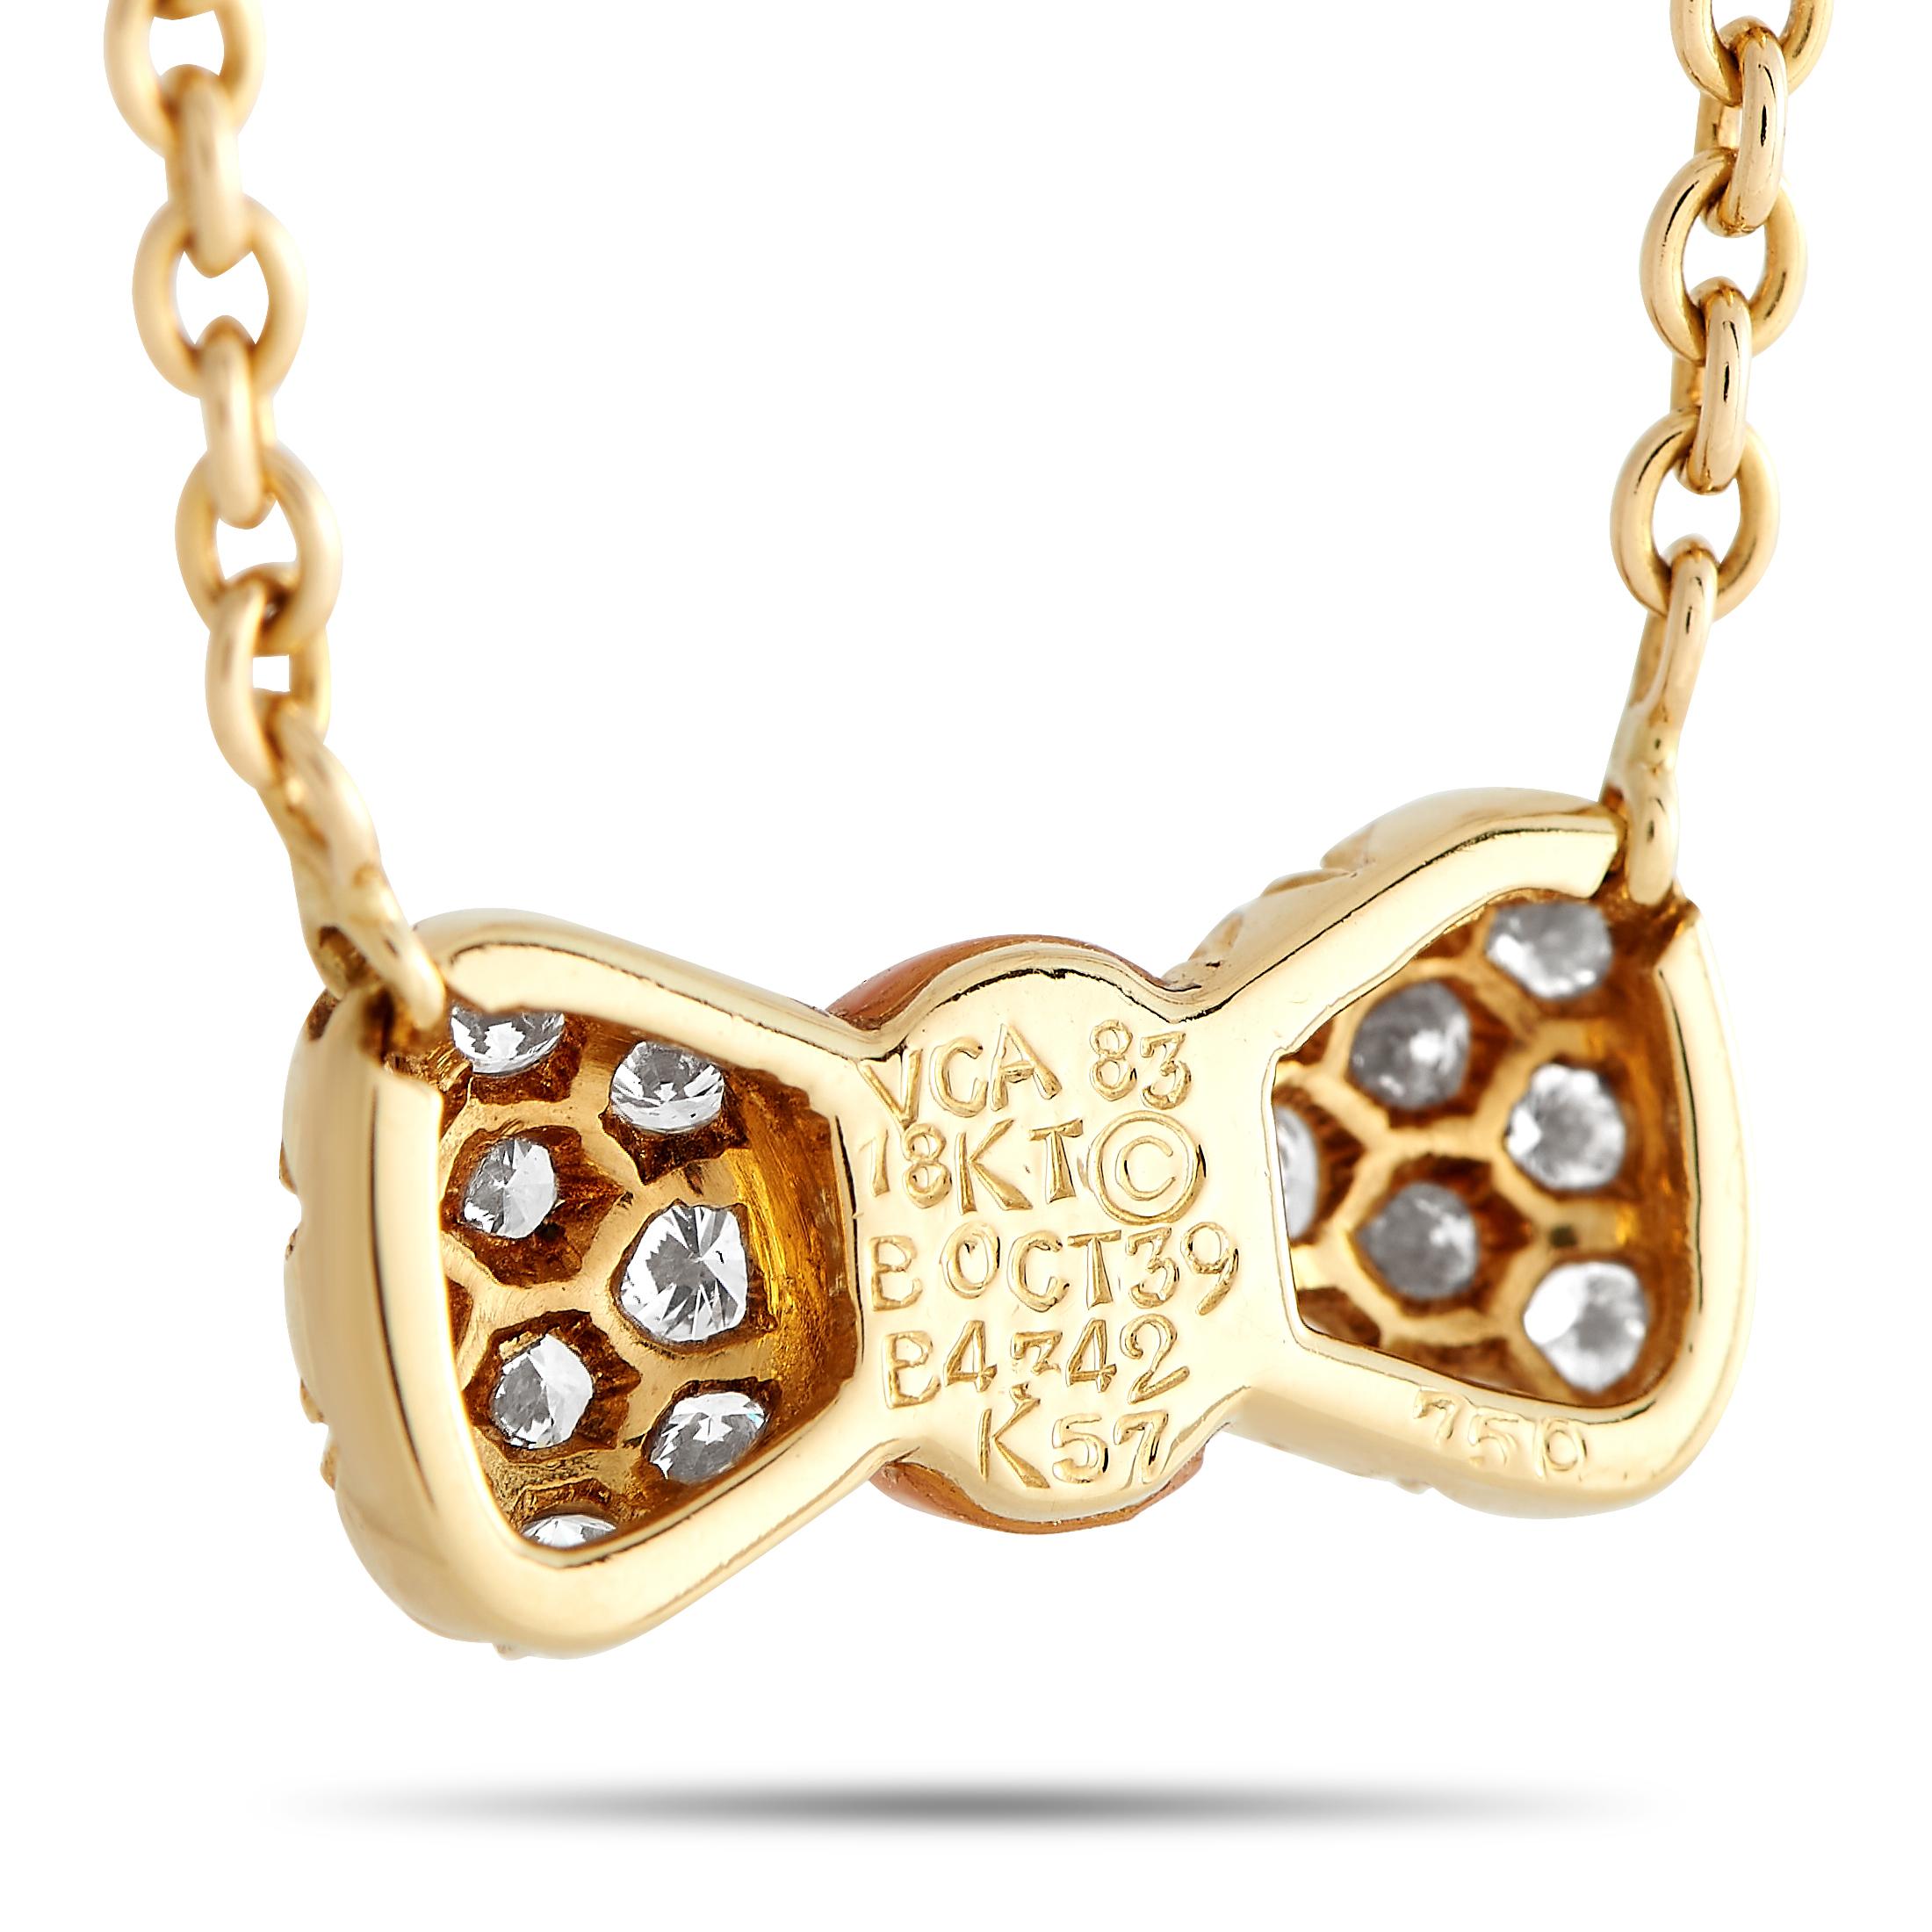 A dainty diamond jewelry for those who seek to add a hint of luxury, a touch of color, and a dash of feminity to their looks. This Van Cleef & Arpels creation features a 15 yellow gold chain holding a 0.37 by 0.75 bow-shaped pendant detailed with a